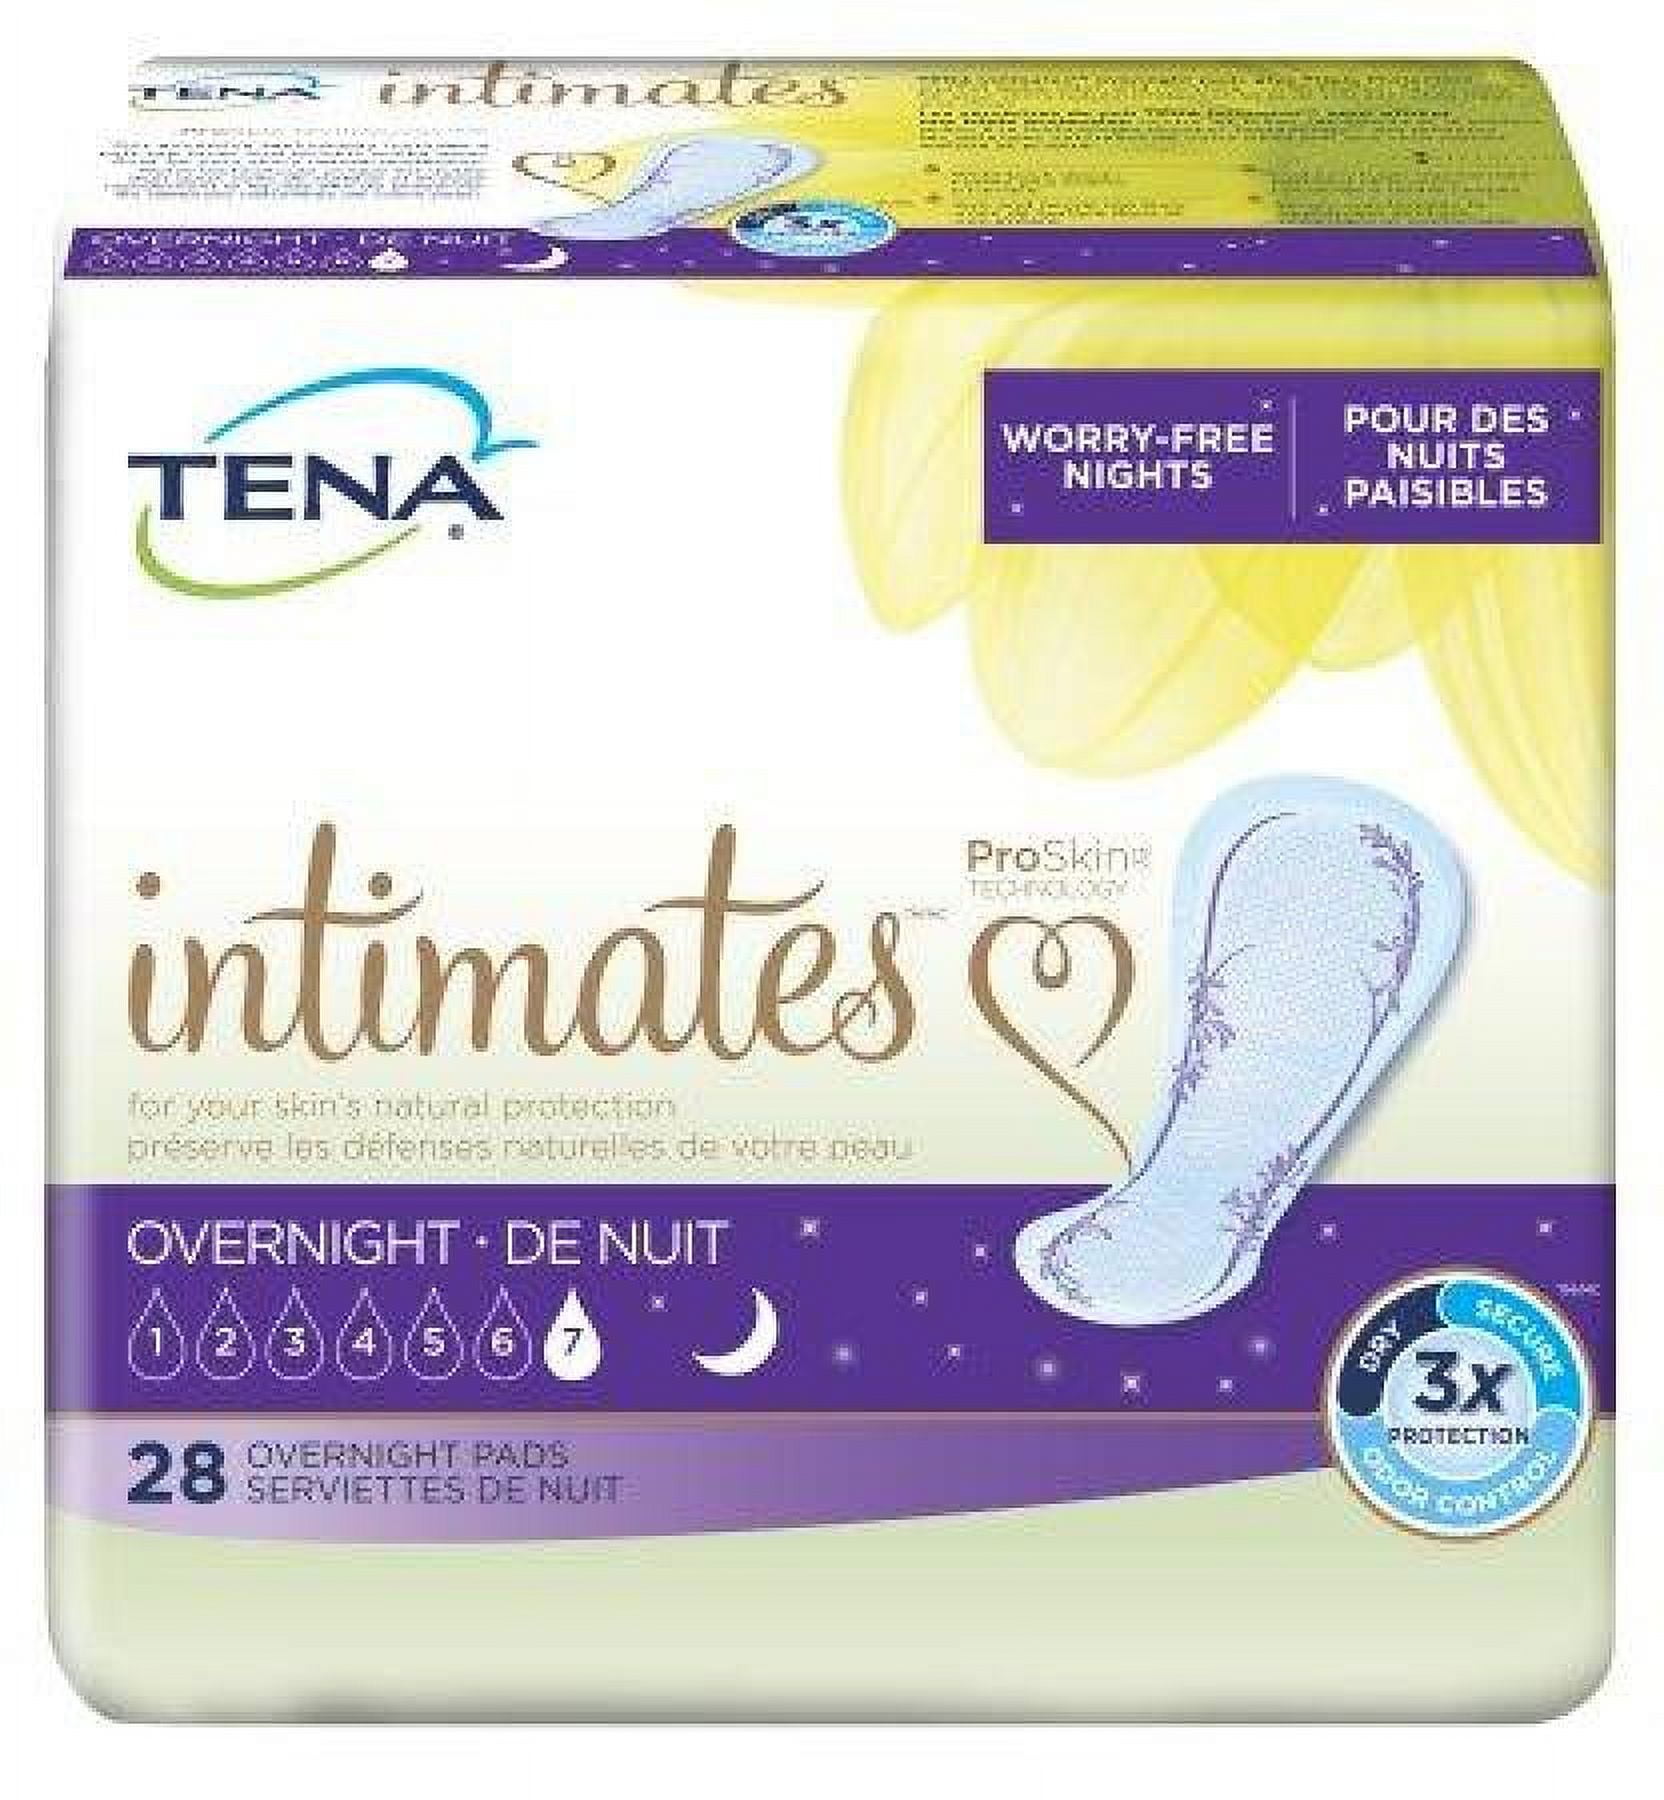 TENA Intimates Overnight Pads, 16 Inch Length, Heavy Absorbency, 28 Count